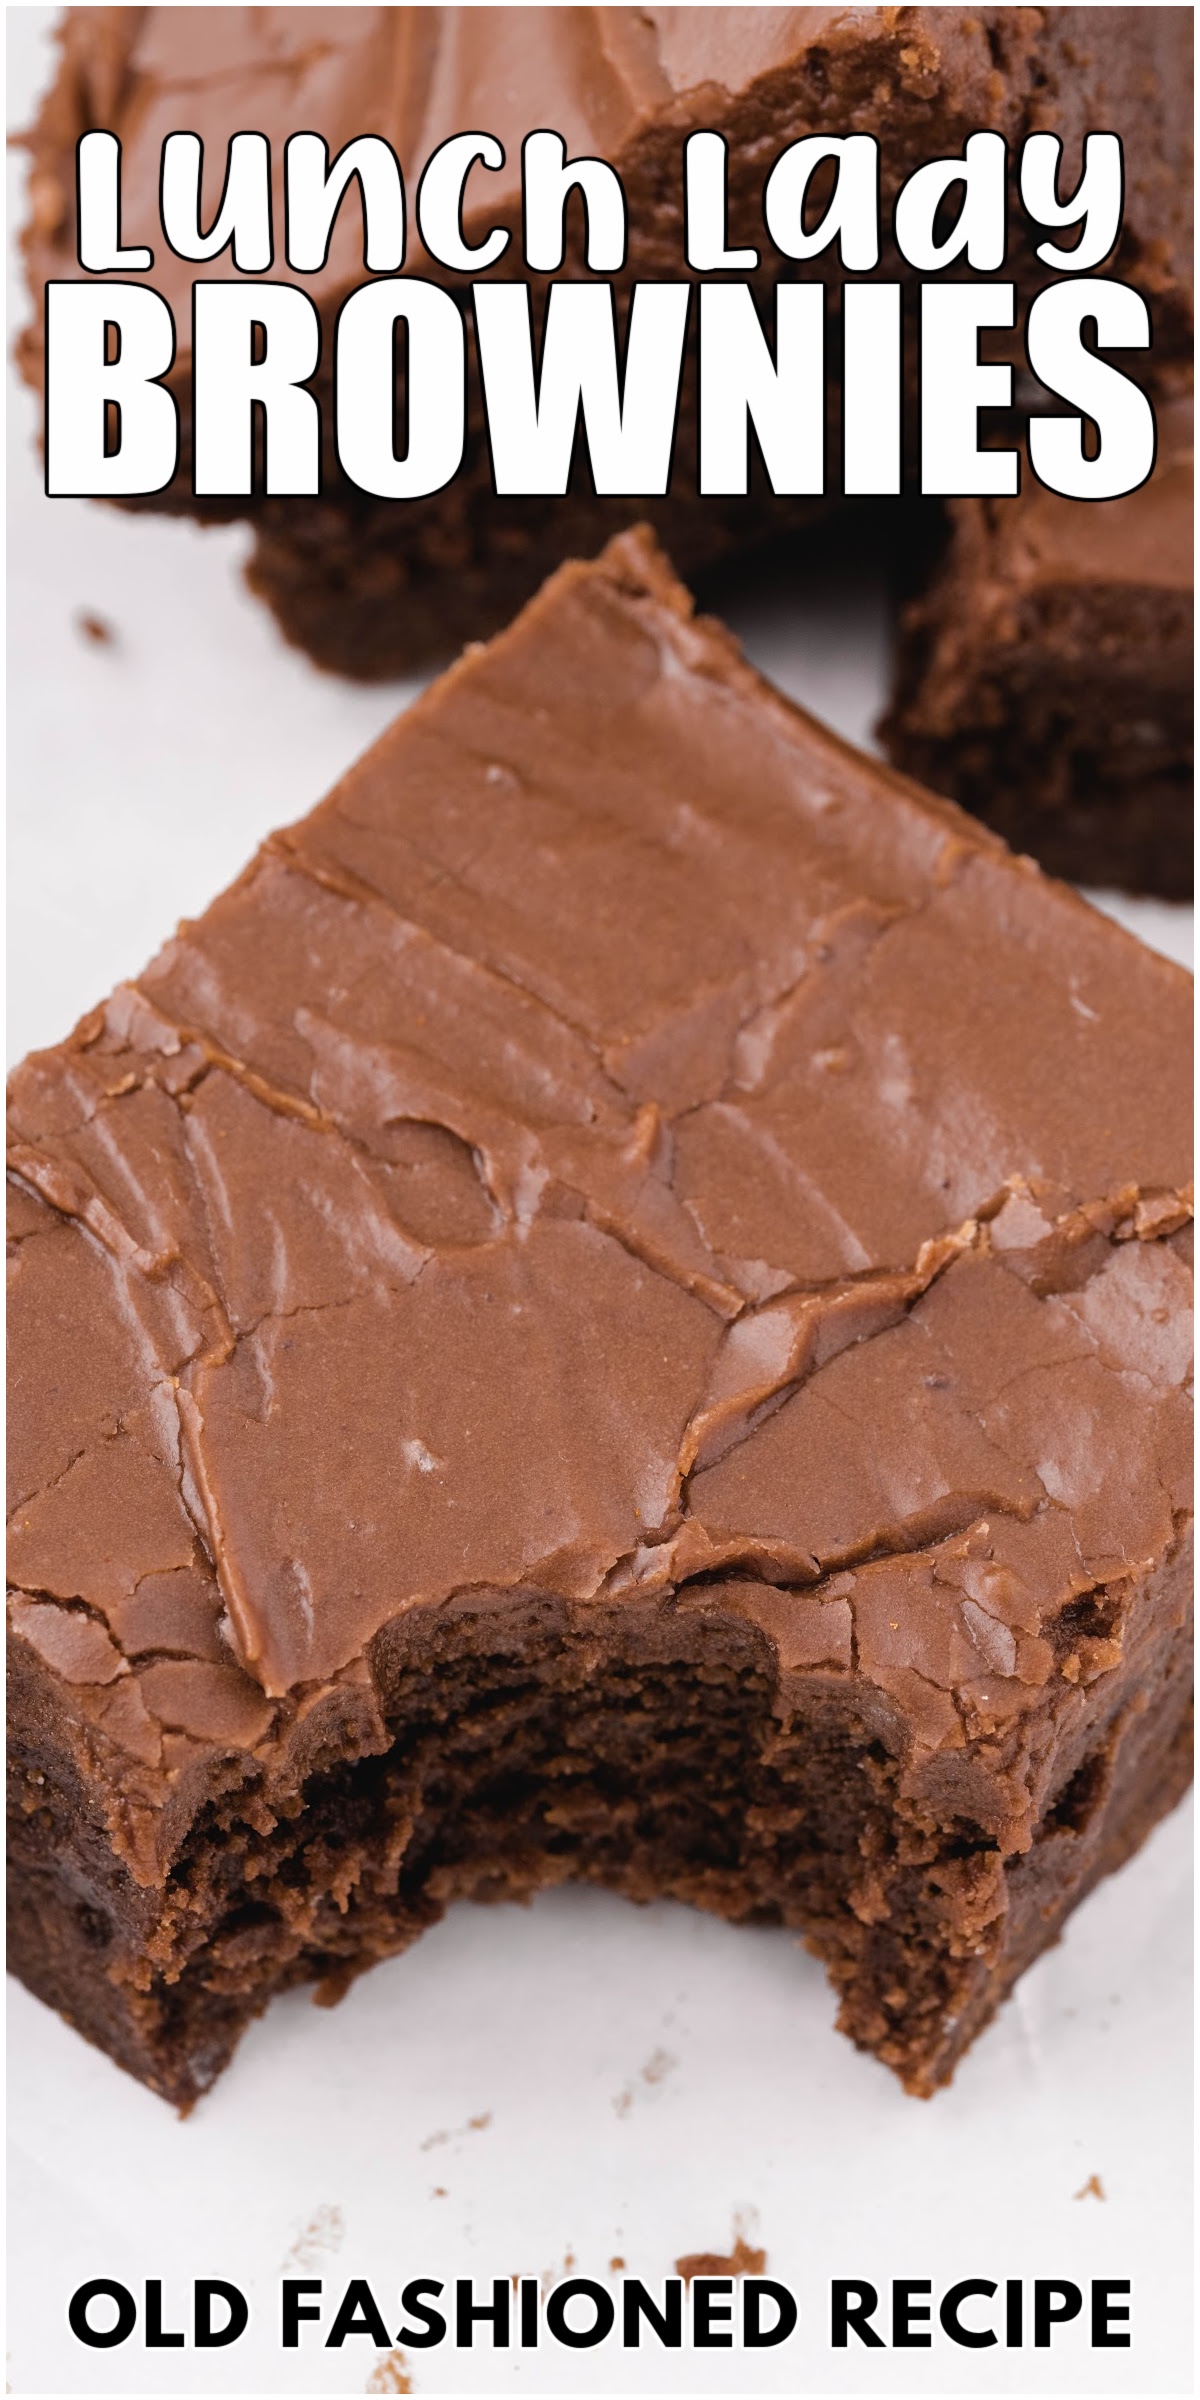 Lunch Lady Brownies Dessert The Best Blog Recipes